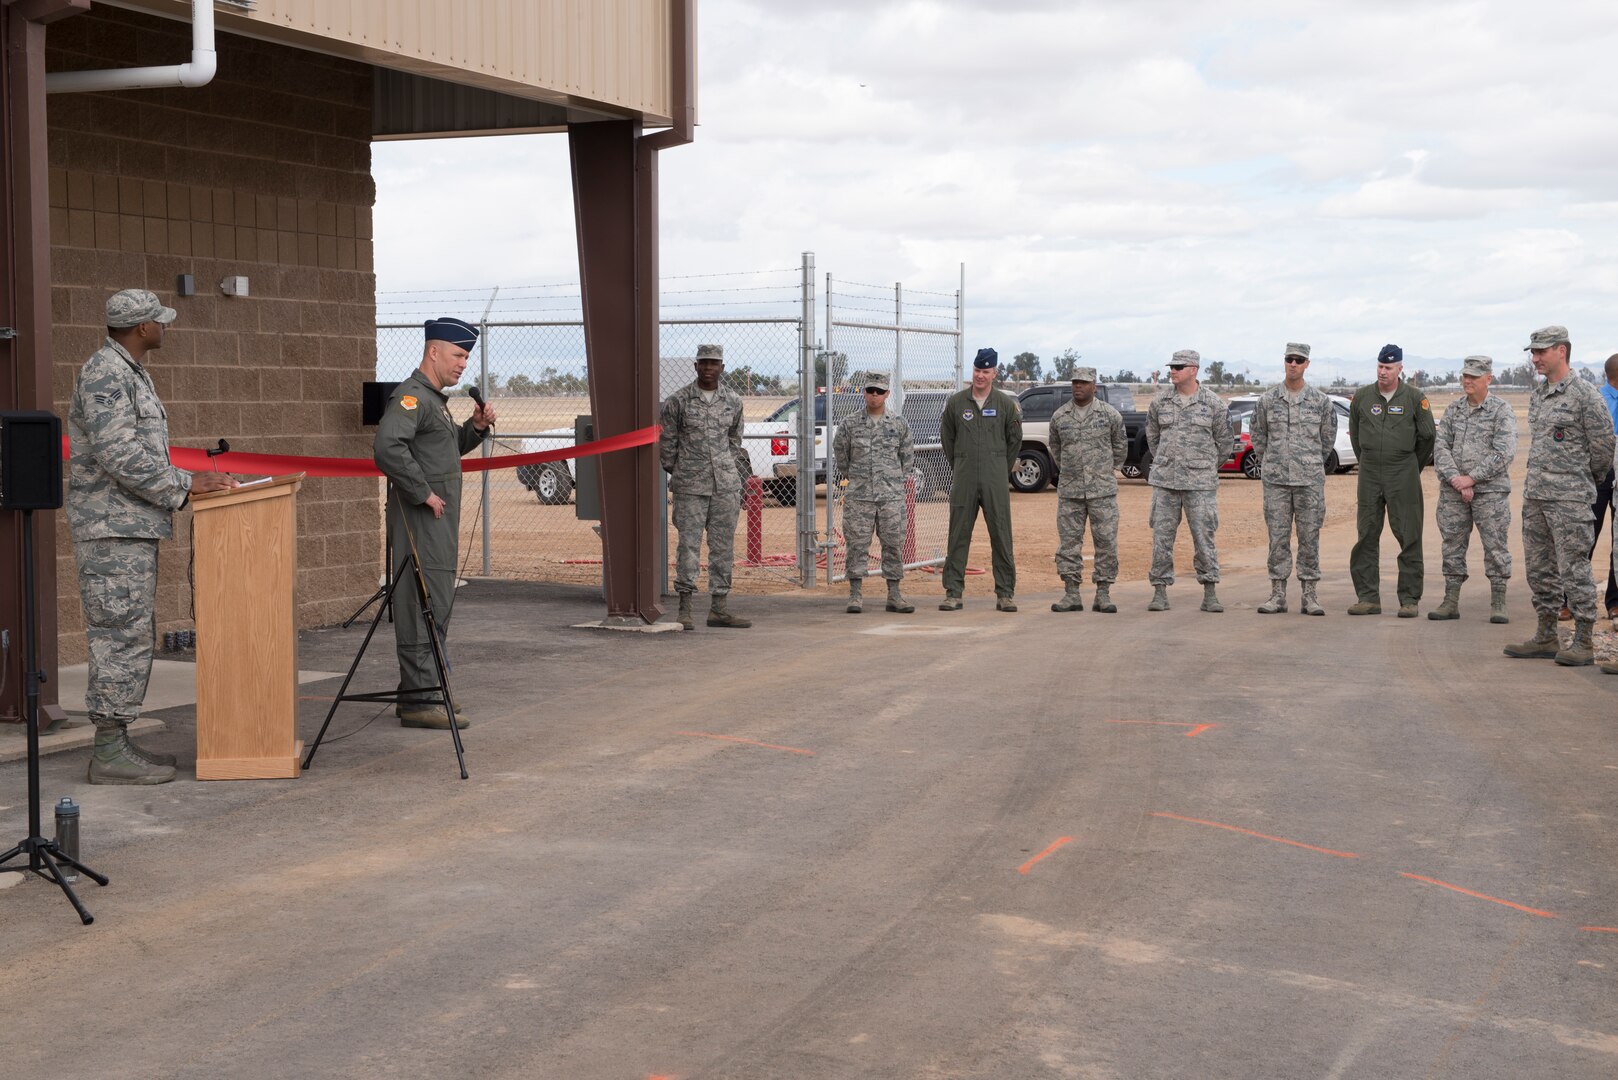 Brig. Gen. Brook Leonard, 56th Fighter Wing commander, addresses the audience during the ribbon-cutting ceremony for the 56th Logistics Readiness Squadron Fuels Management Flight’s new pump house at Luke Air Force Base, Ariz., March 15, 2018. The fuel pump house will improve safety by reducing the amount of time fuel operators spend driving on base roads. (U.S. Air Force photo by Senior Airman Ridge Shan)